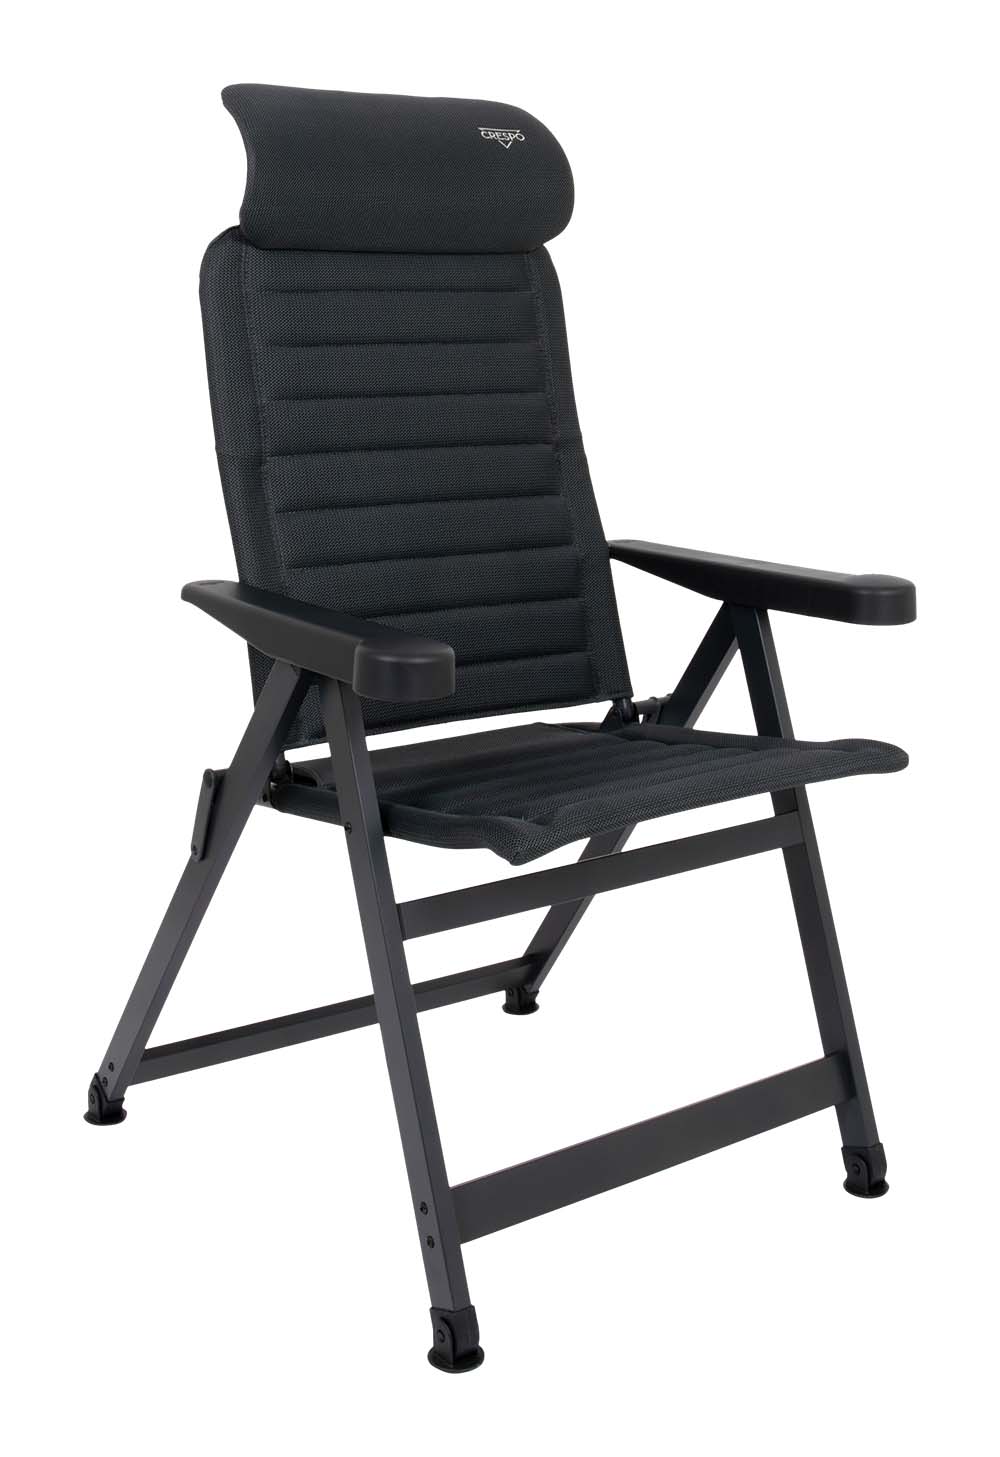 1149505 An ergonomic 7-position adjustable standing chair. The chair is made in a square frame and equipped with stabilization feet so that the chair is always sturdy. In addition, the chair is equipped with an adjustable headrest. The comfortable and chic upholstery is extra breathable and does not retain moisture due to its open cell structure. As a result, the chair dries much faster than chairs with traditional foam padding. Offers maximum comfort due to the 7-position adjustable backrest. Both the backrest and armrests are ergonomically shaped. The chair features an anodized H-frame for added stability and strength. Its unique design makes the chair compact to fold and easy to carry.